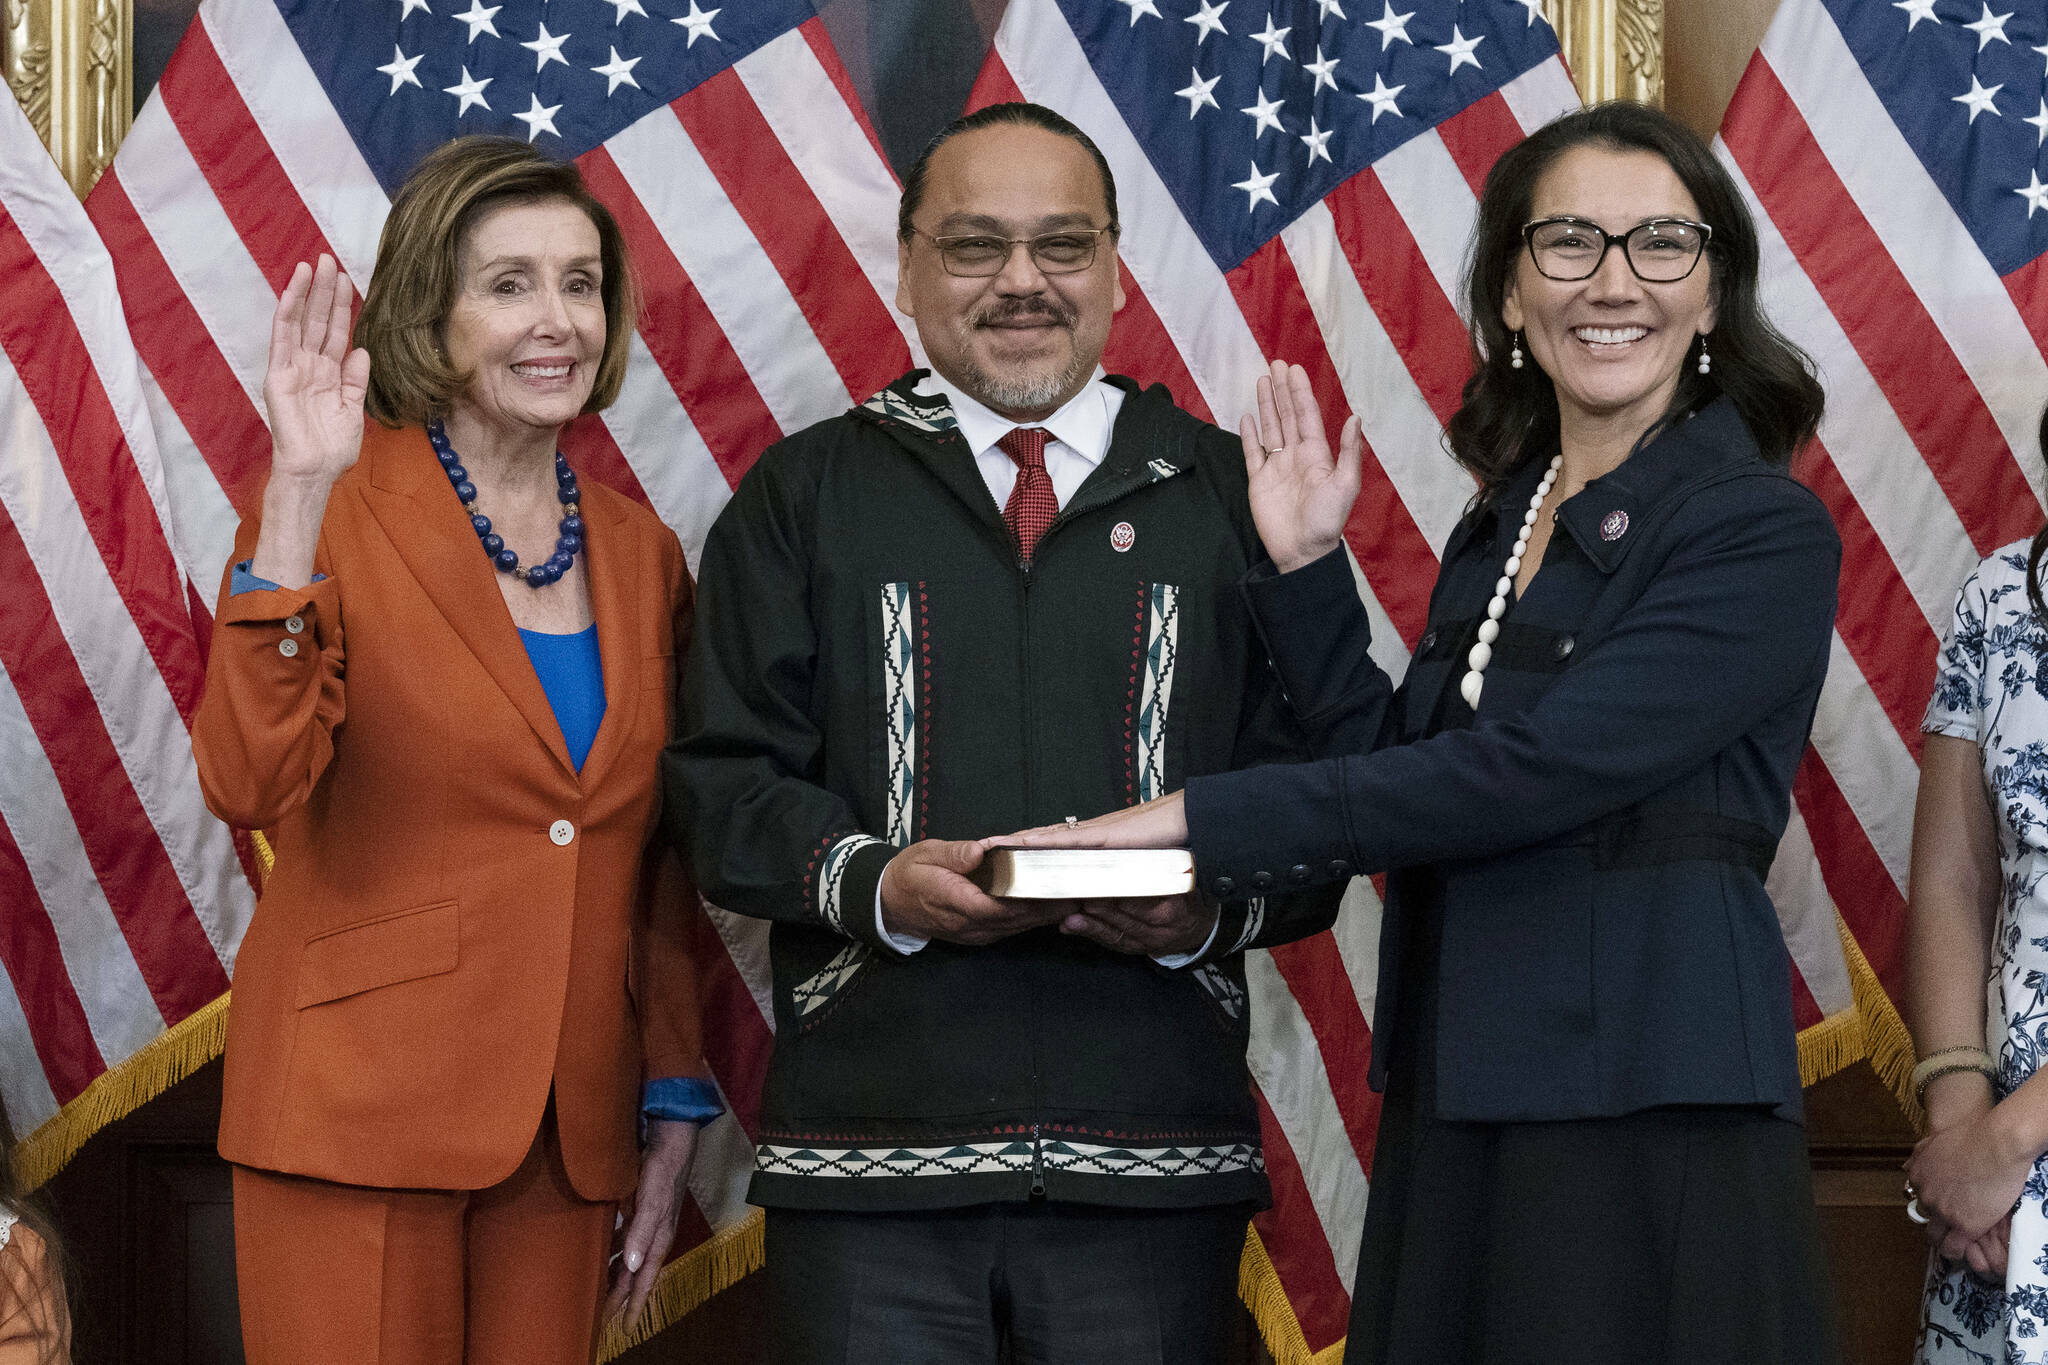 Speaker of the House Nancy Pelosi of Calif., left, administers the House oath of office to Rep. Mary Peltola, D-Alaska, standing next to her husband Eugene “Buzzy” Peltola Jr., center, during a ceremonial swearing-in on Capitol Hill in Washington, Tuesday, Sept. 13, 2022. Peltola’s husband Eugene died in an airplane crash in Western Alaska on Sept. 13, 2023. (AP Photo/Jose Luis Magana, File)